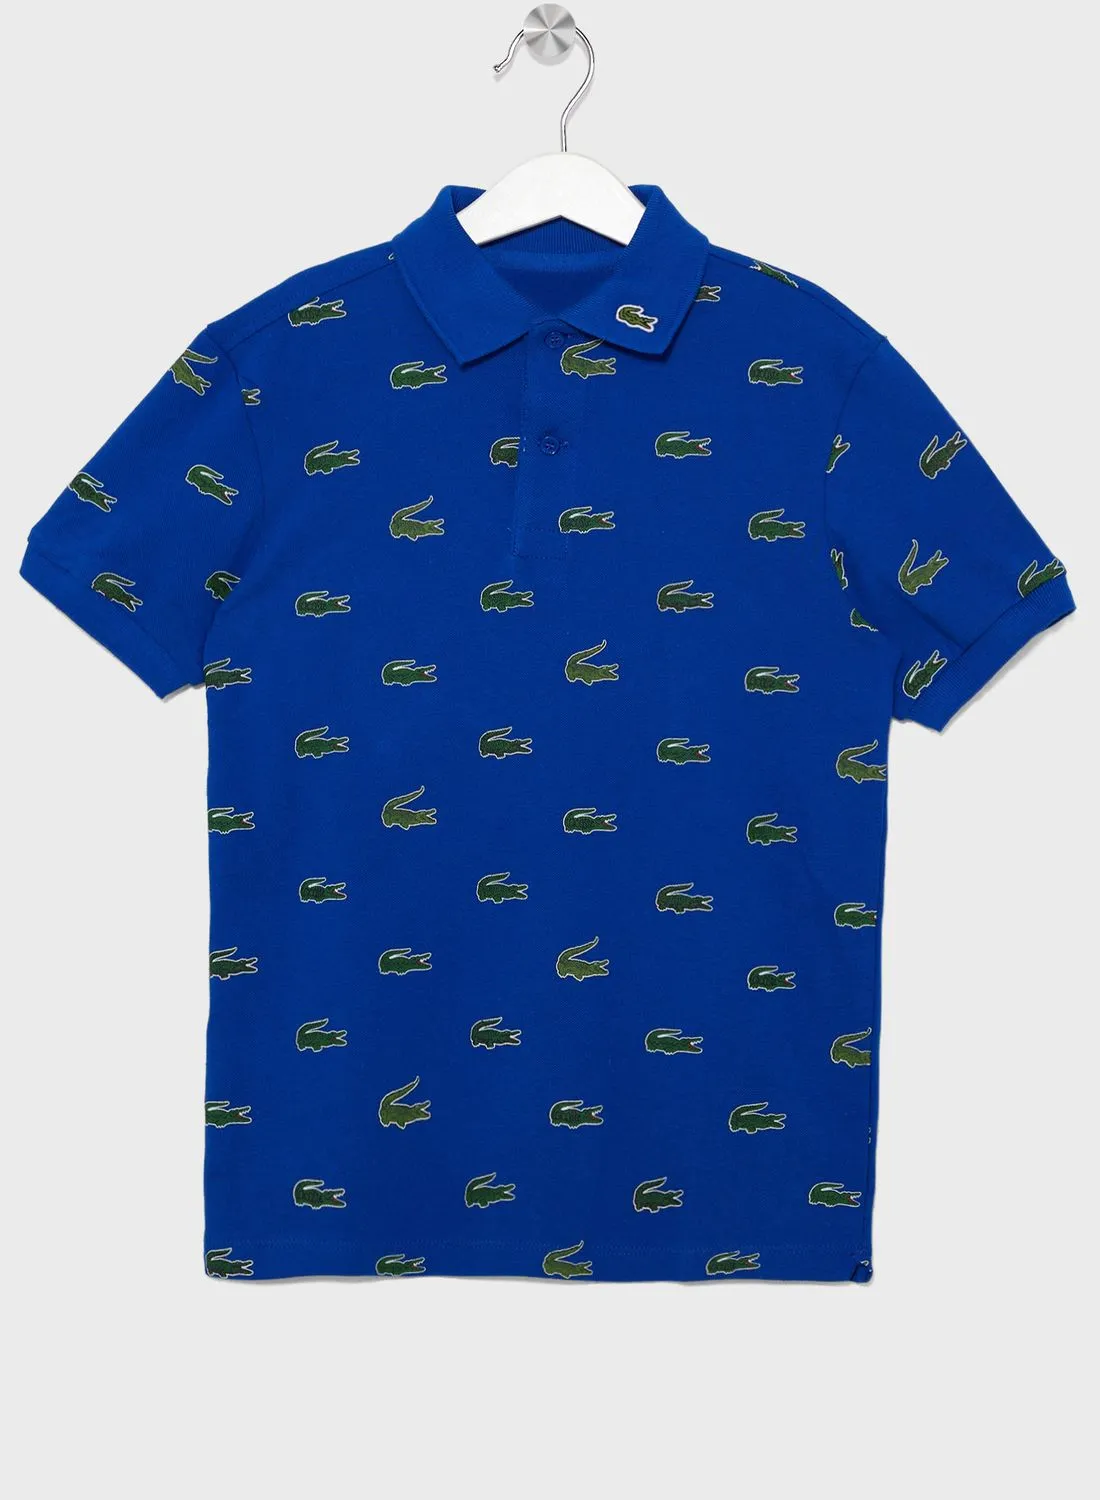 LACOSTE Kids Printed Polo